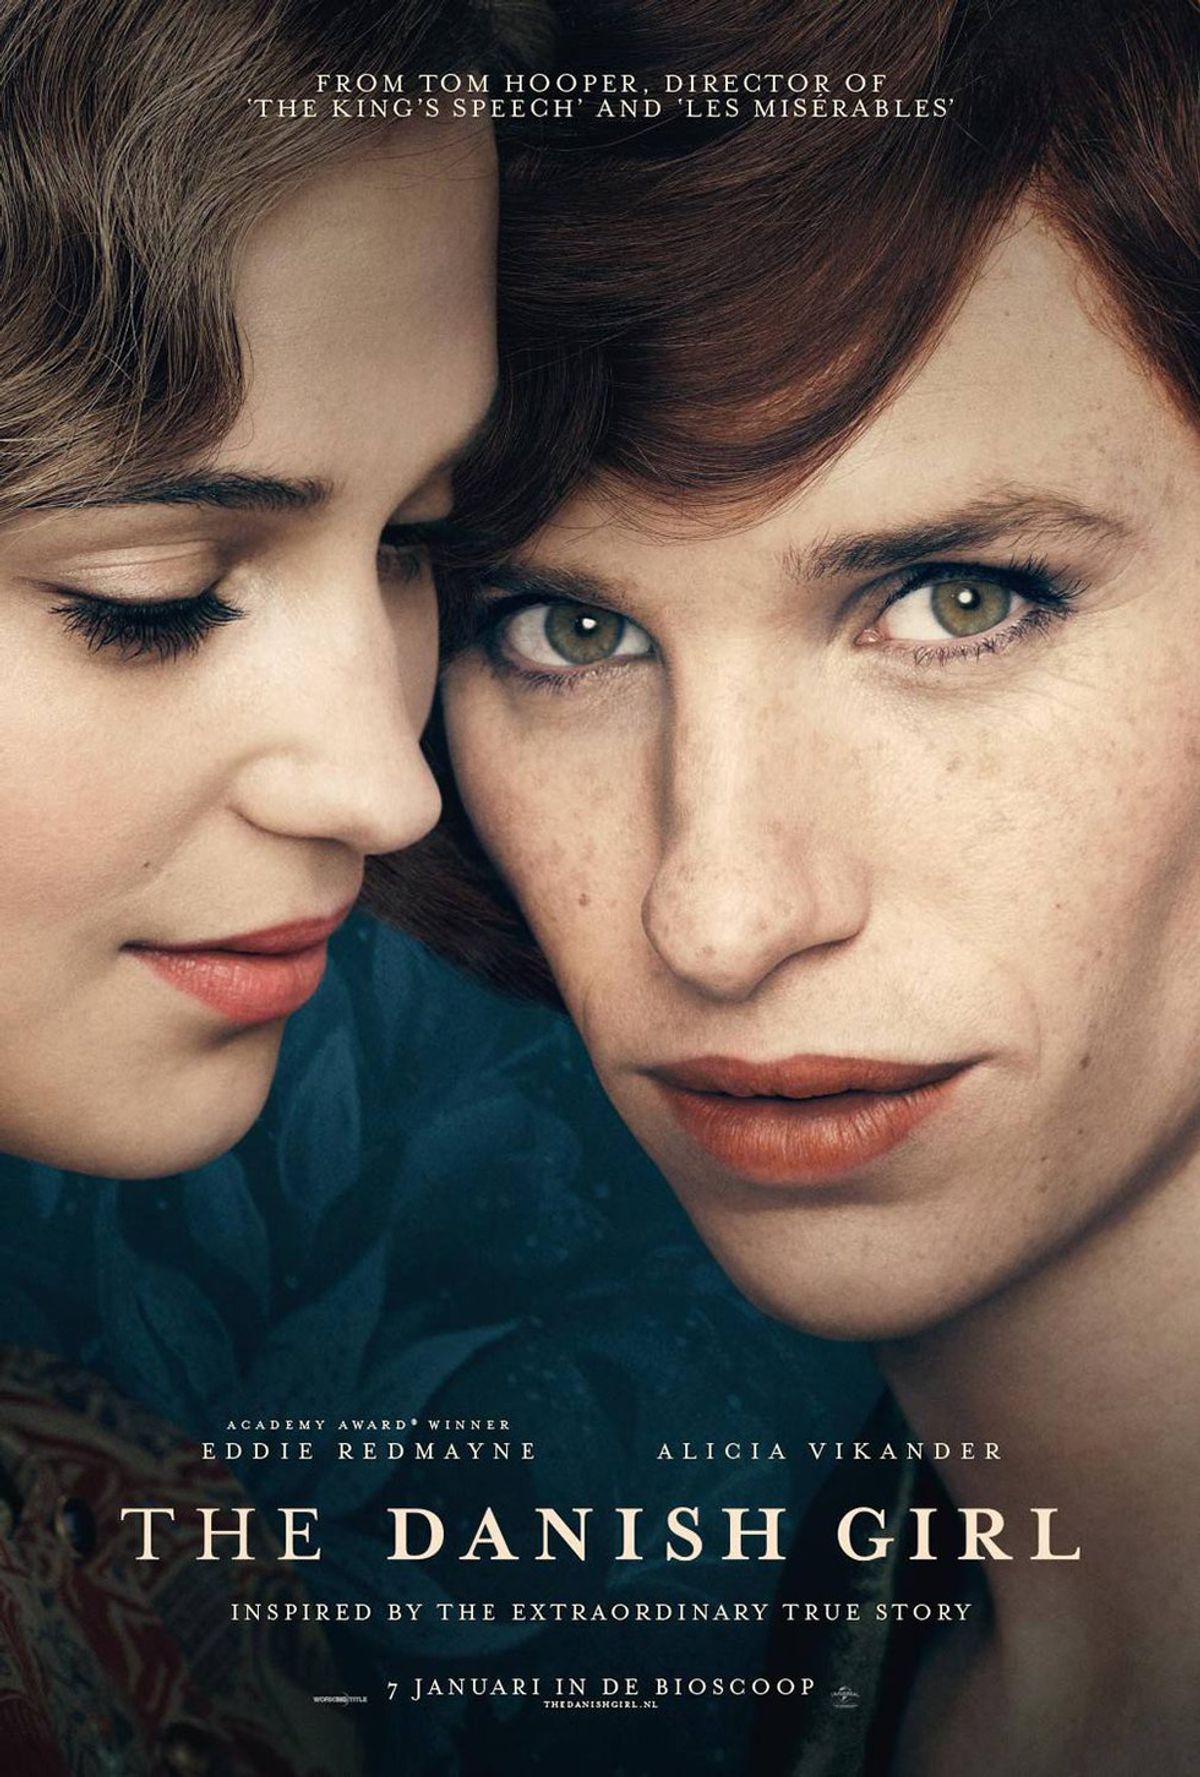 The Danish Girl: A Storm In The Calm